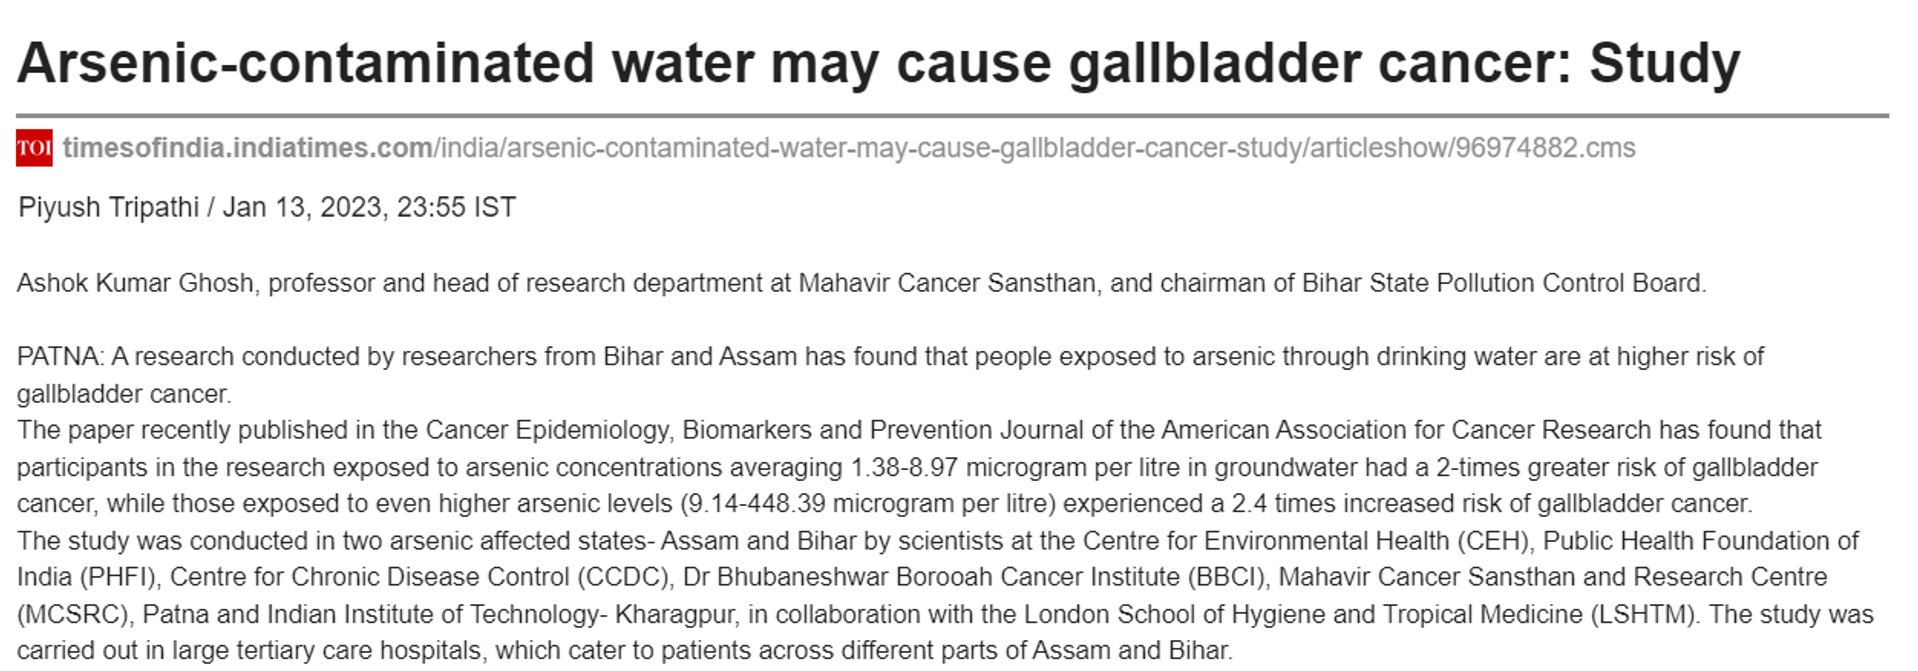 Arsenic-contaminated water may cause gallbladder cancer: Study